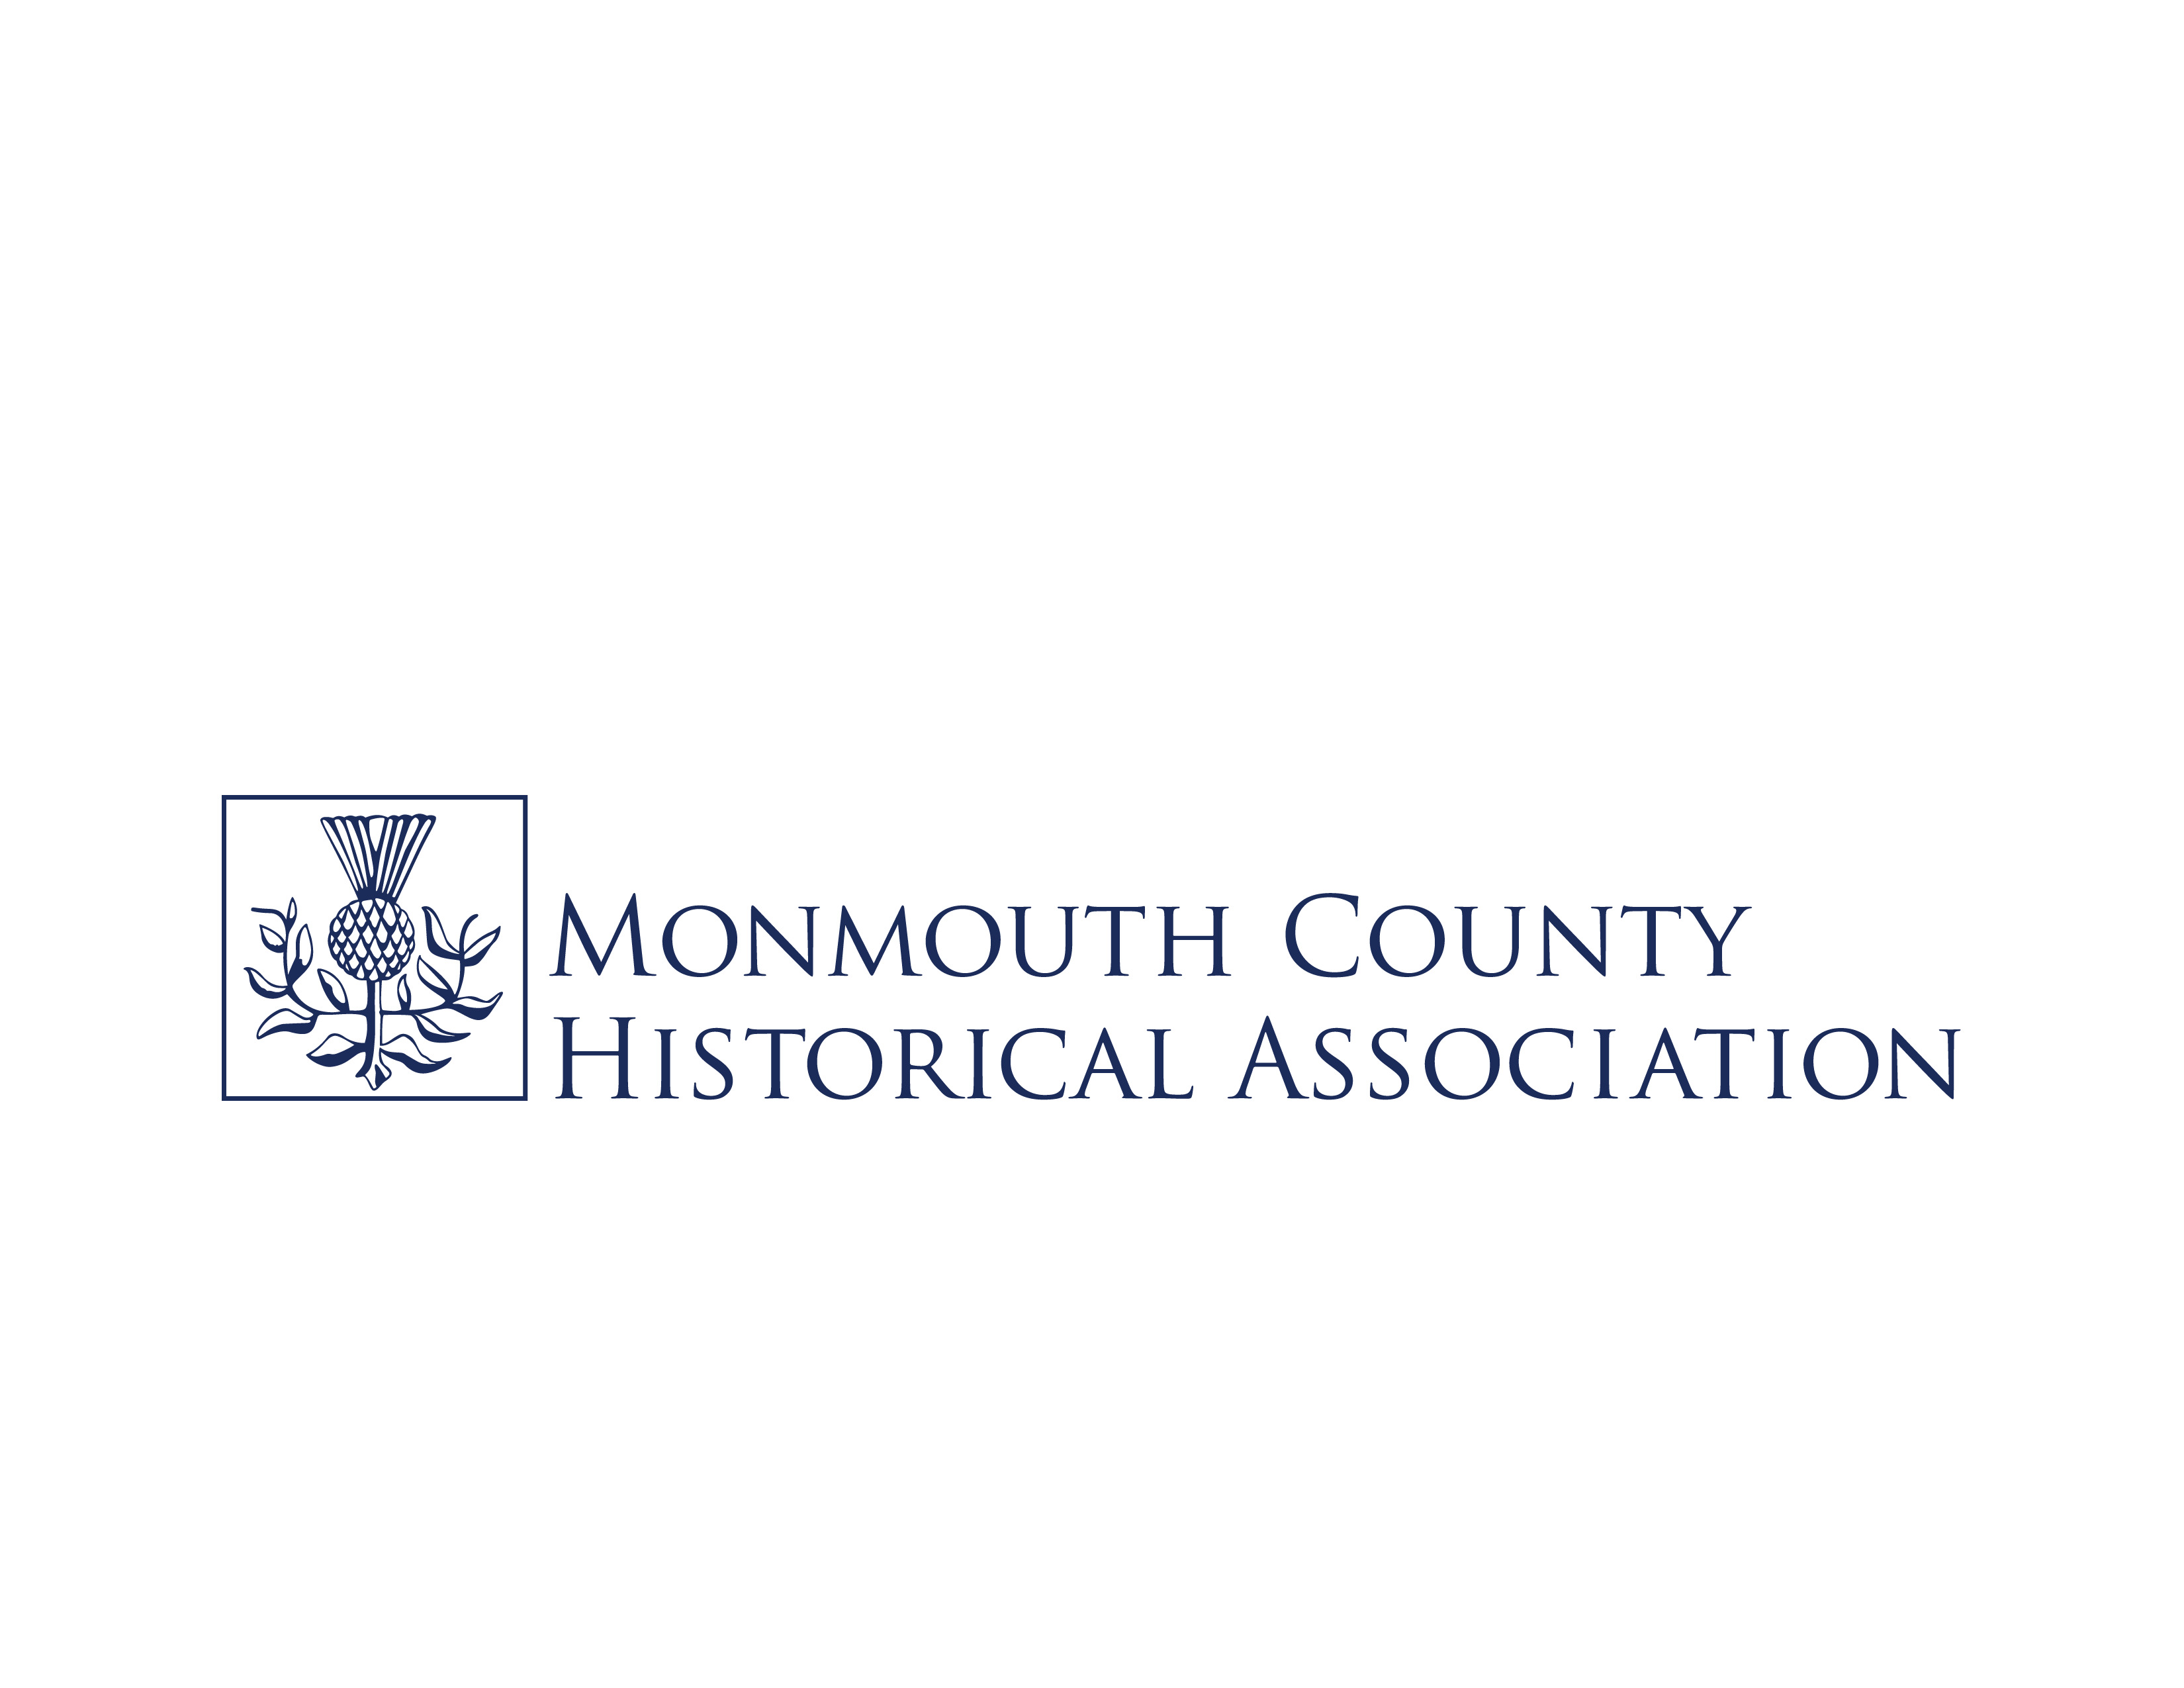 Monmouth County Historical Association